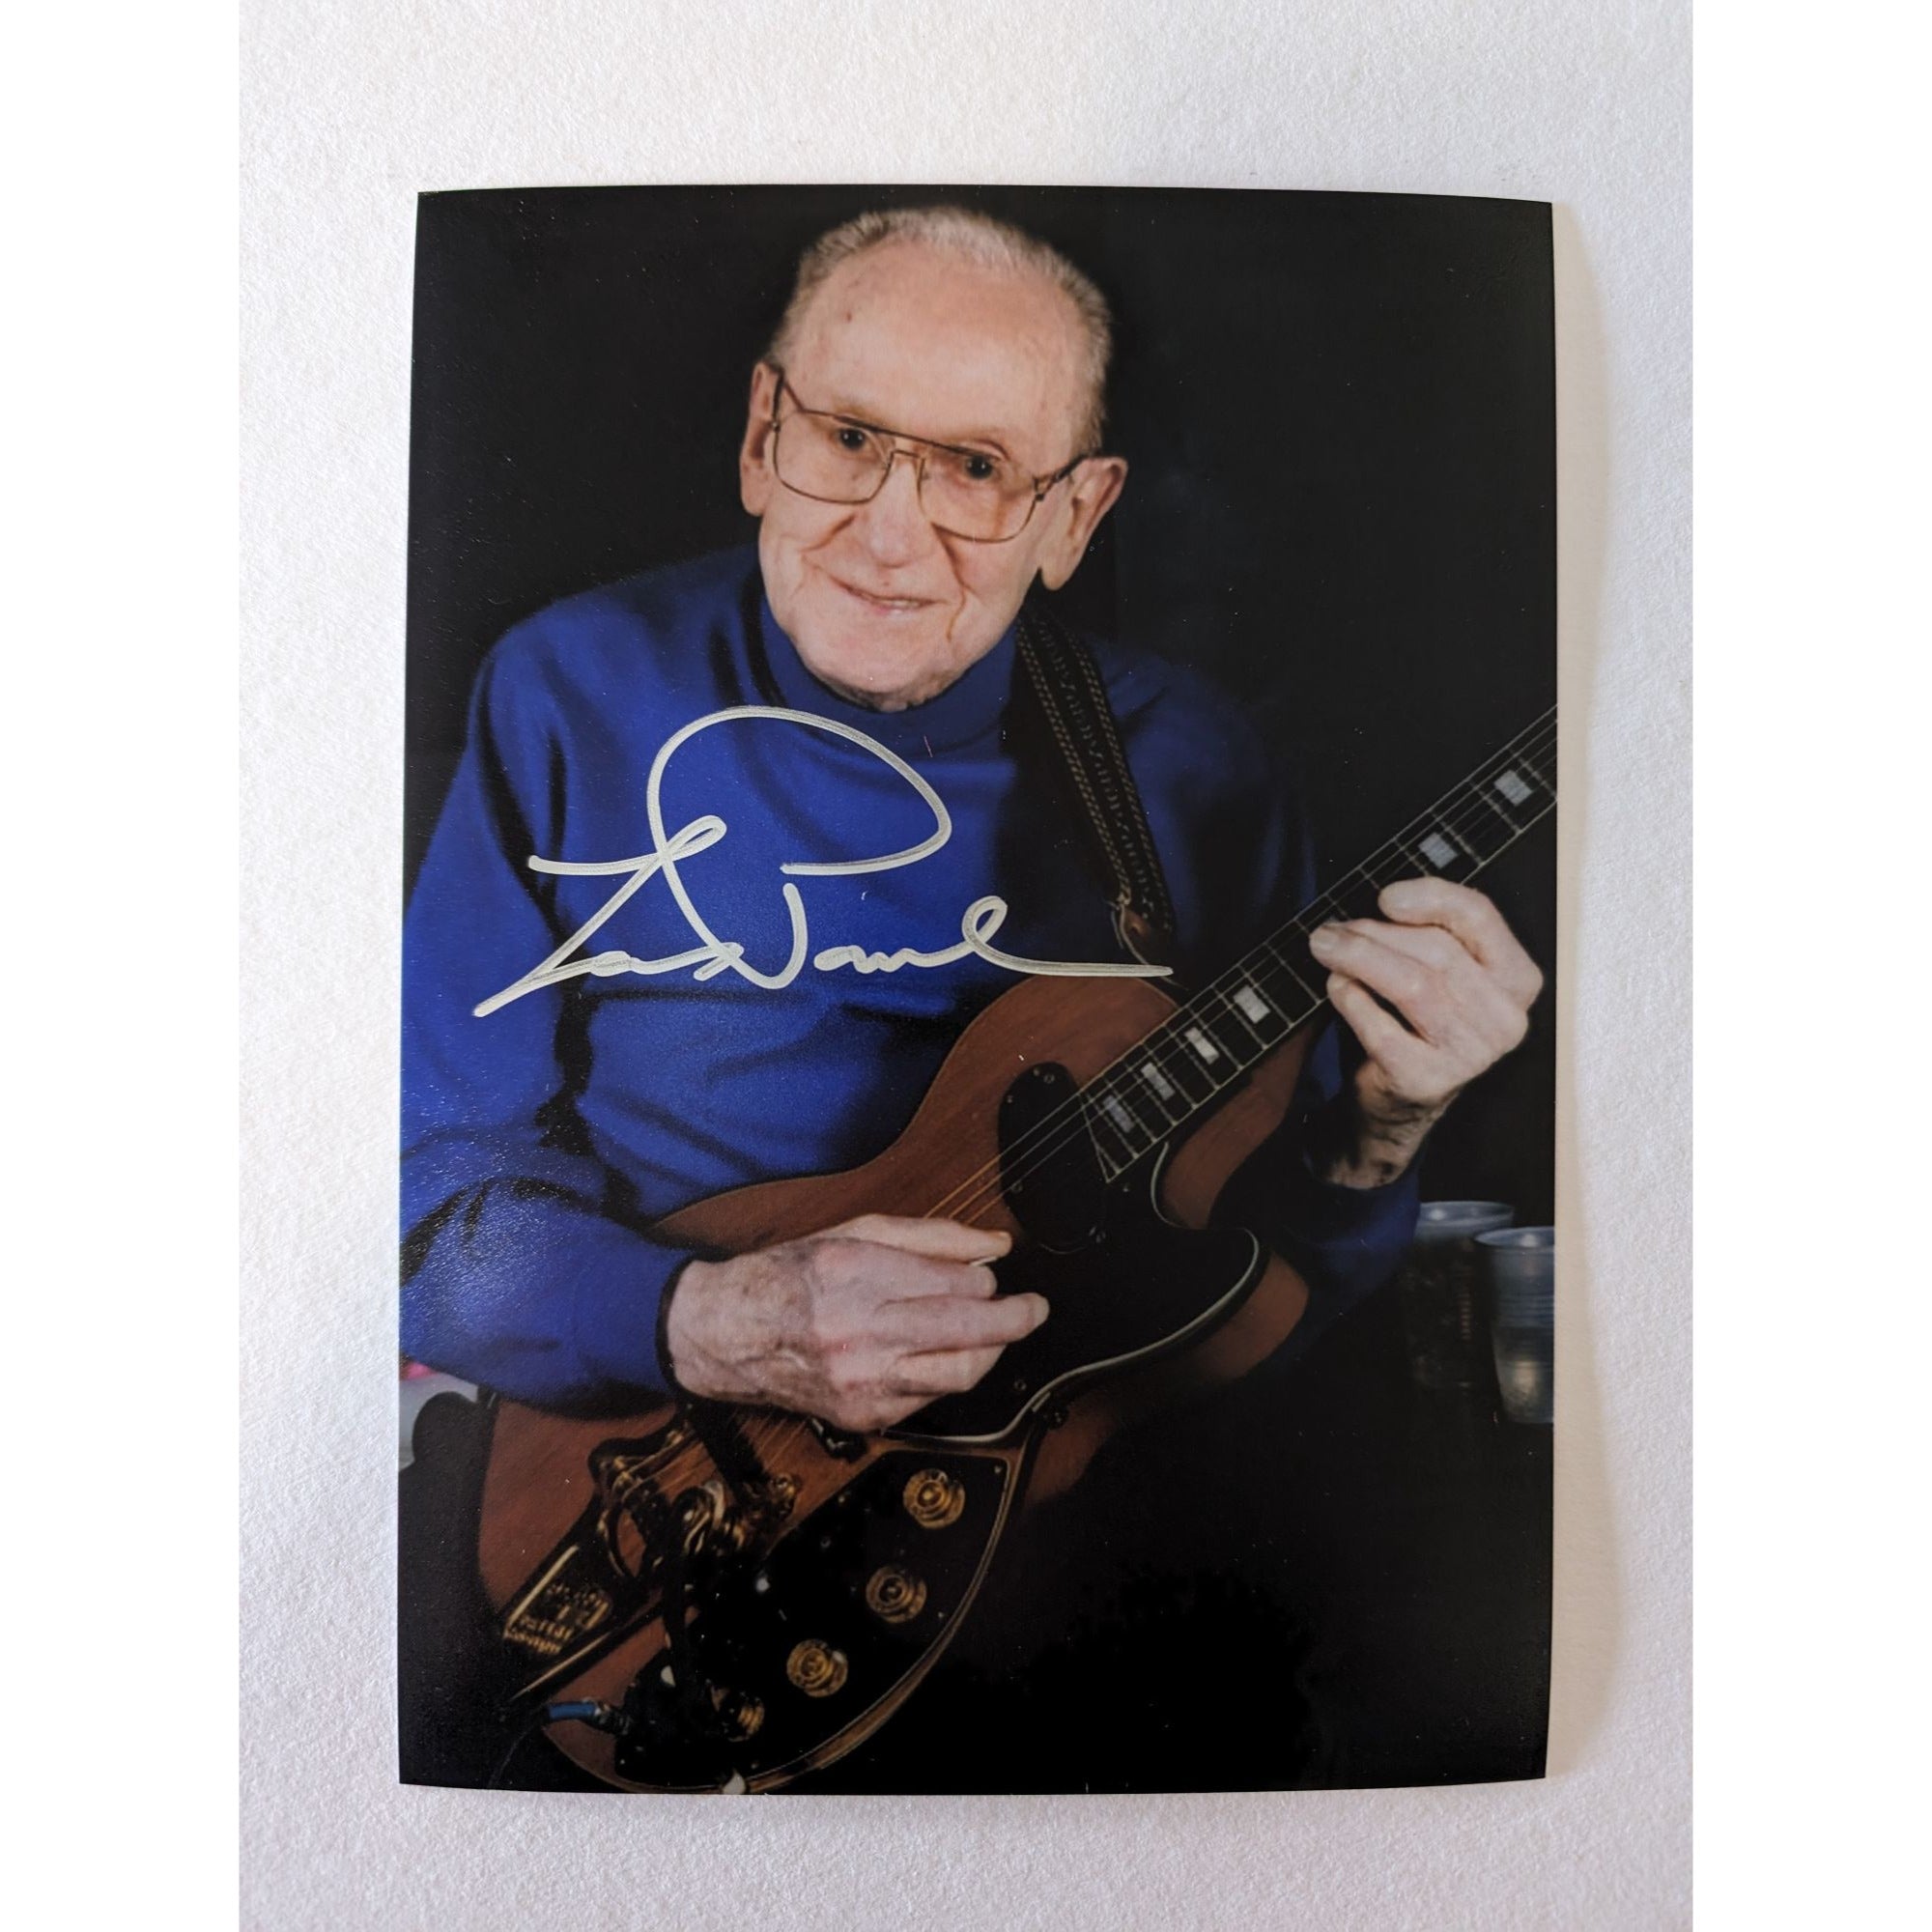 Les Paul 5x7 photograph signed with proof